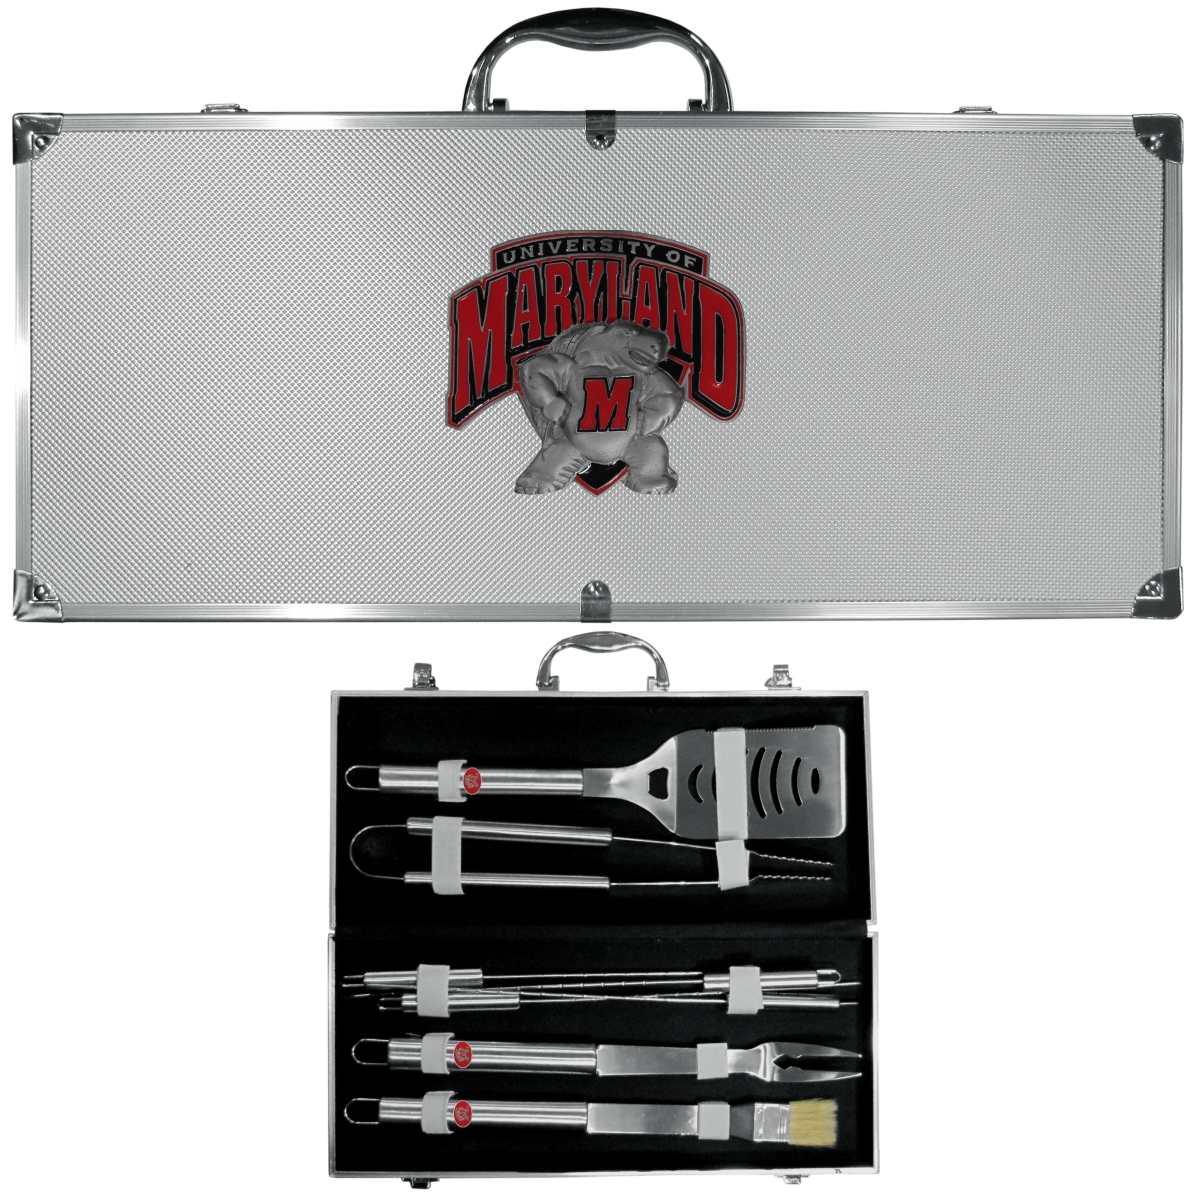 Picture of Siskiyou BBQC64B Unisex NCAA Maryland Terrapins 8 Piece Stainless Steel BBQ Set with Metal Case - One Size